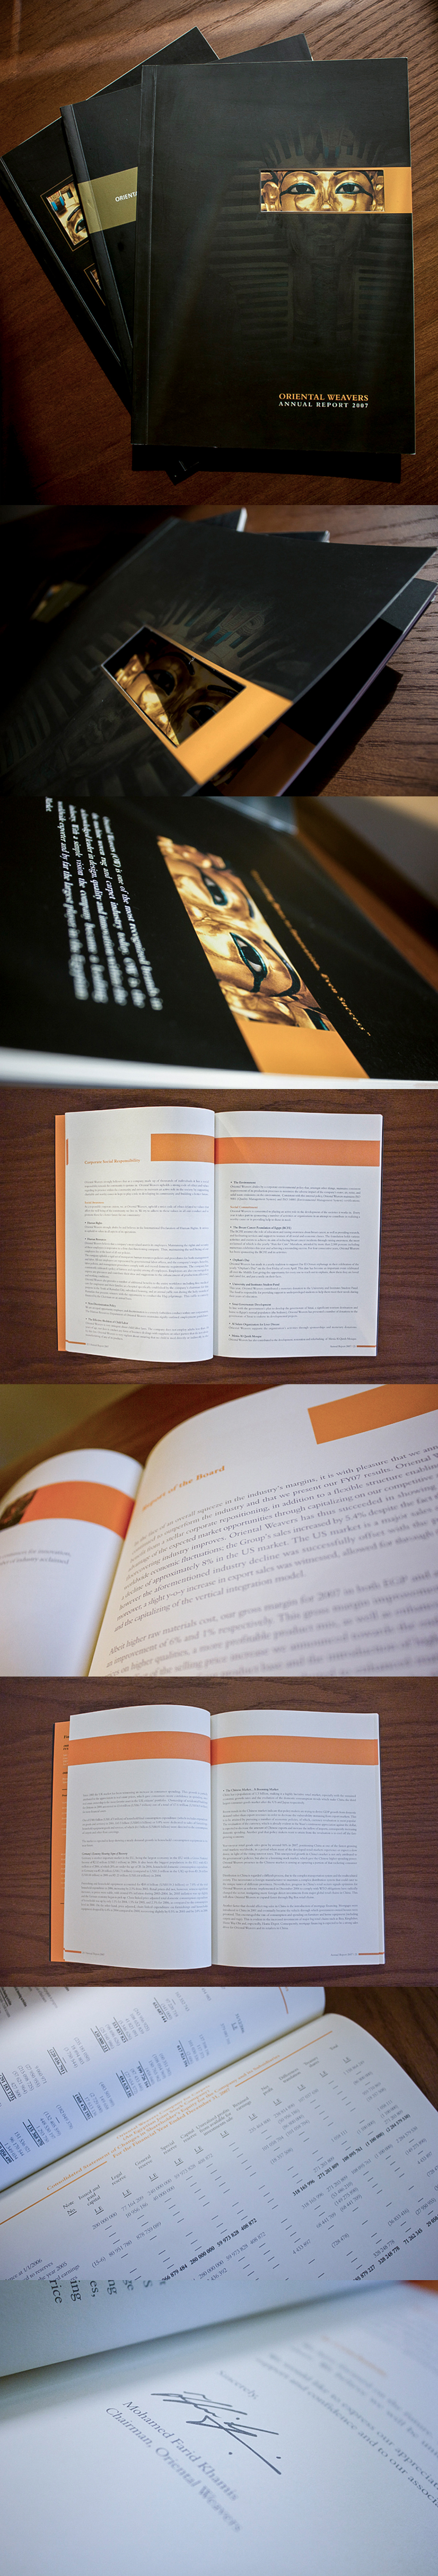 OW annual report brochure Corporate Brochure company profile Company profile design company profiles corporate brochure design Corporate brochures Layout